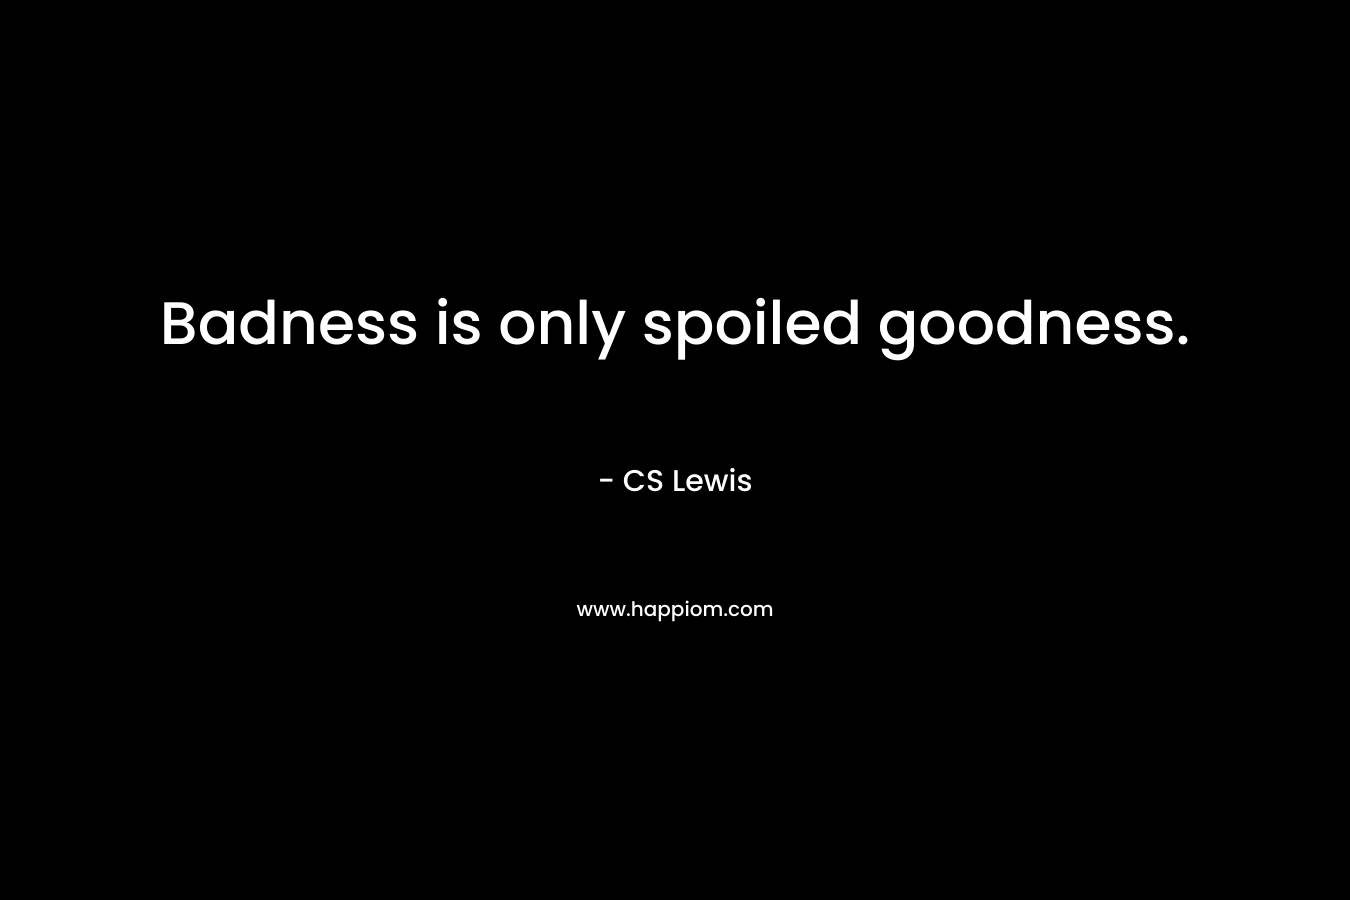 Badness is only spoiled goodness. – CS Lewis